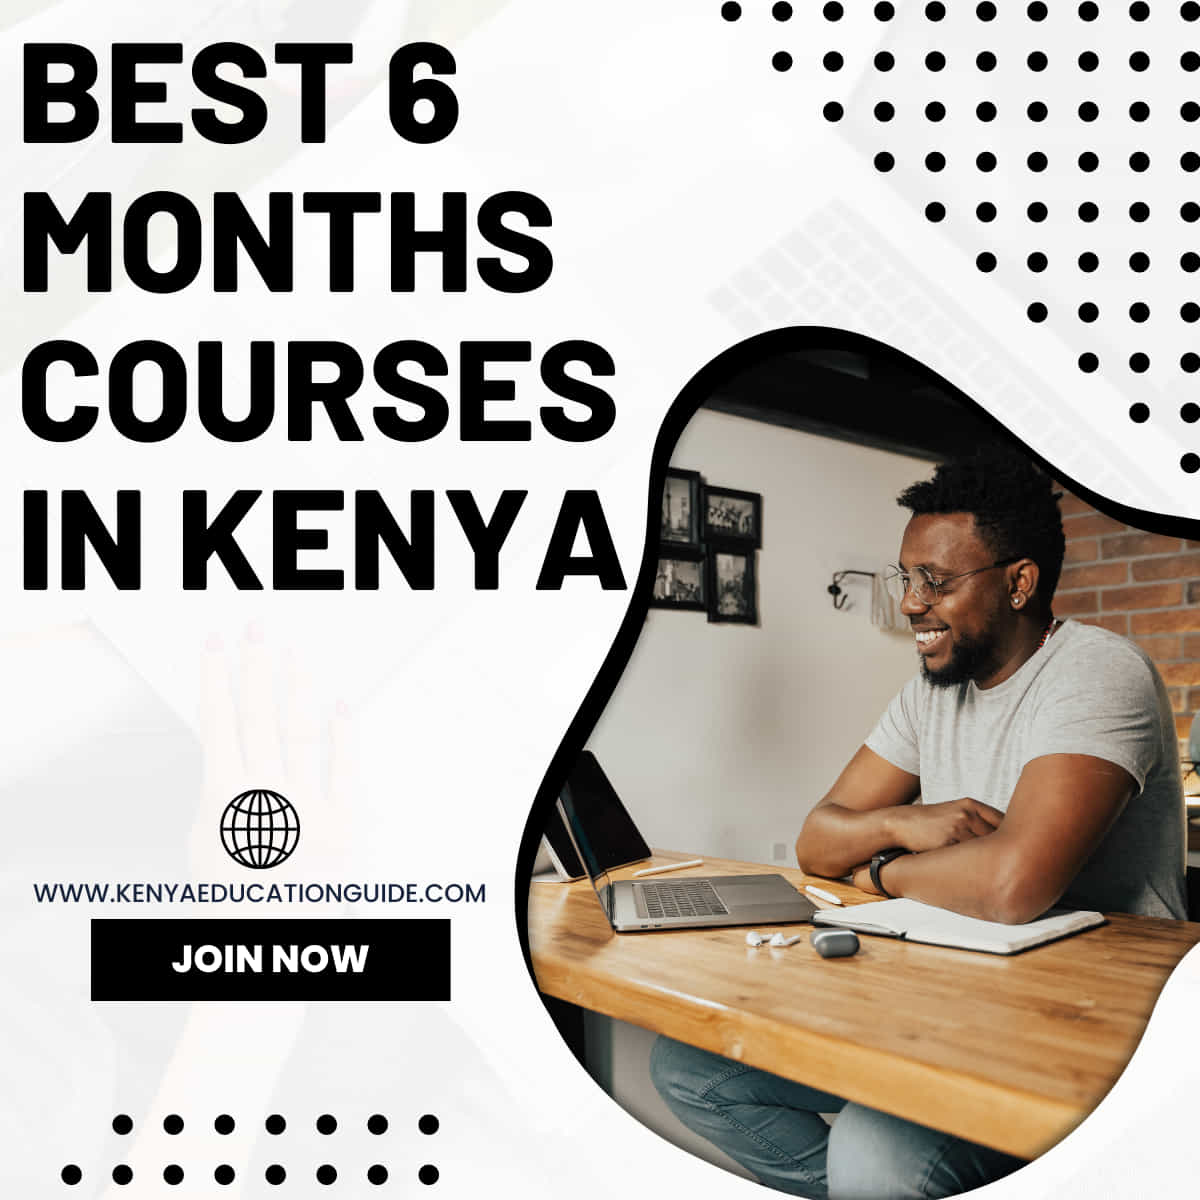 6 months courses in Kenya